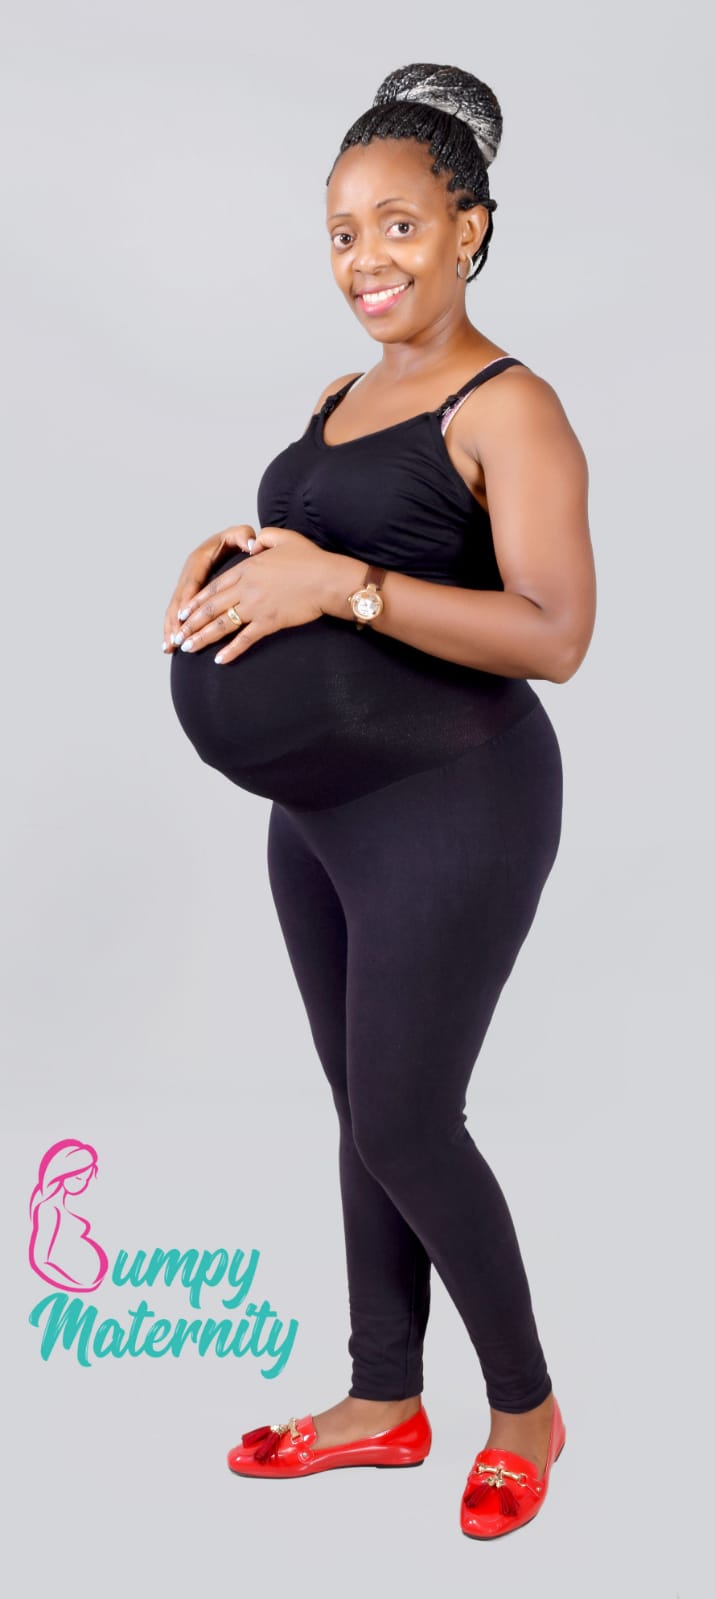 Black Over Bump Plus Size Maternity Trousers